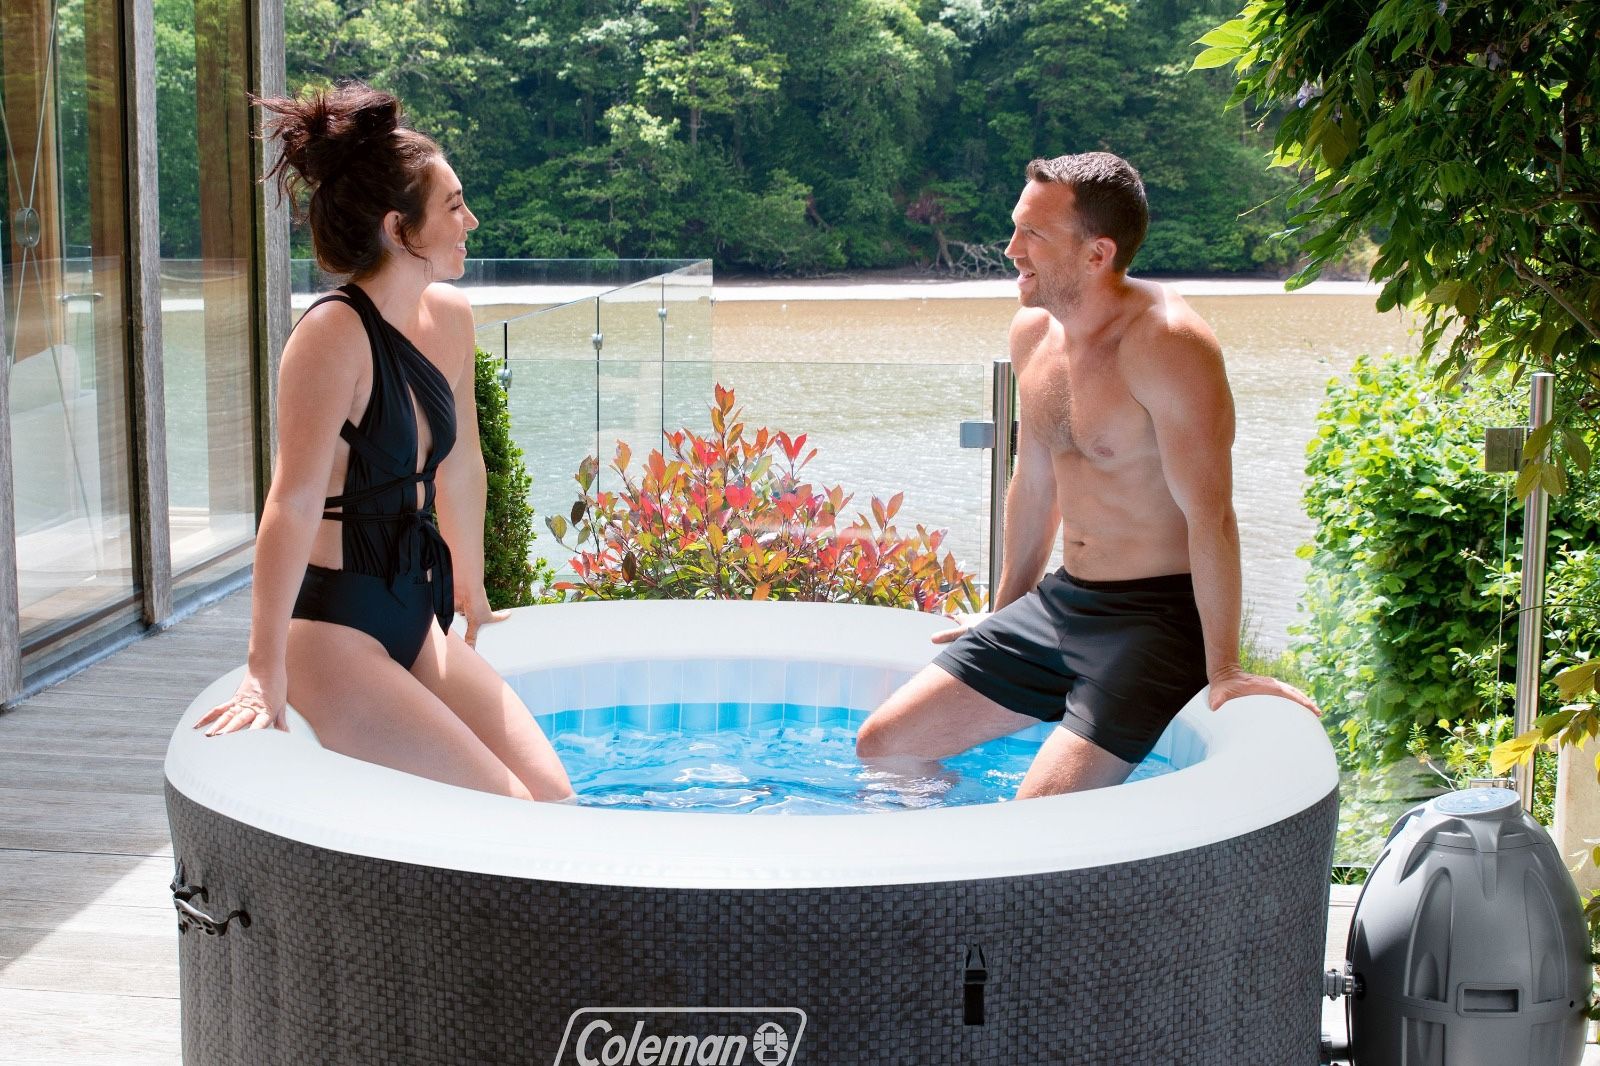 Title: Coleman Saluspa 71" x 26" Havana AirJet Inflatable Hot Tub with Remote Control, 2-4 person